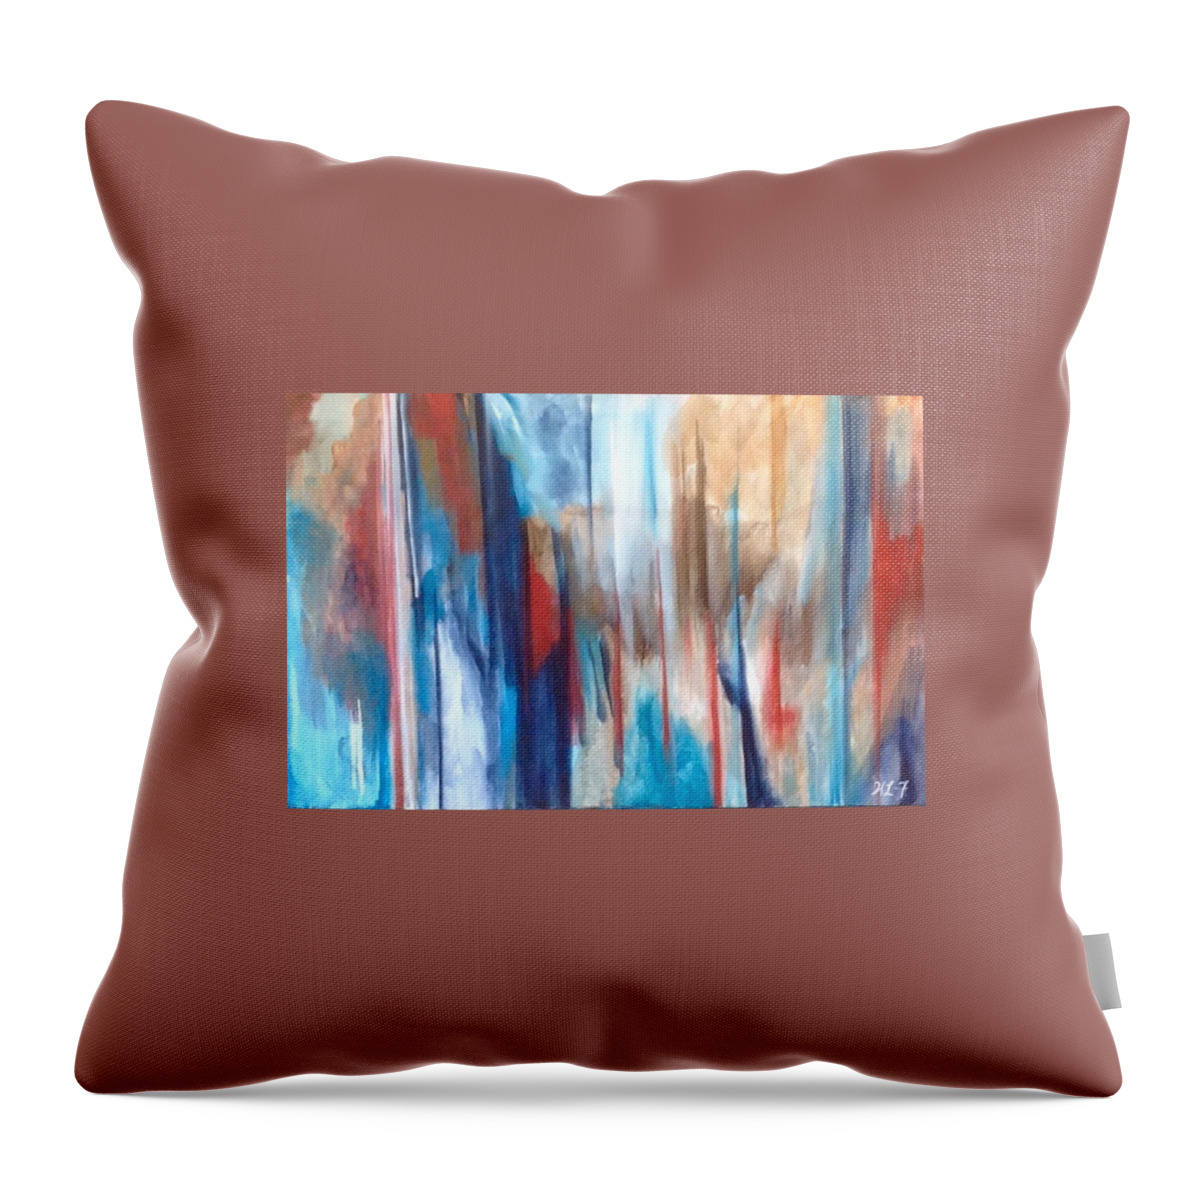 Abstract Throw Pillow featuring the painting Rain by Heather Lovat-Fraser